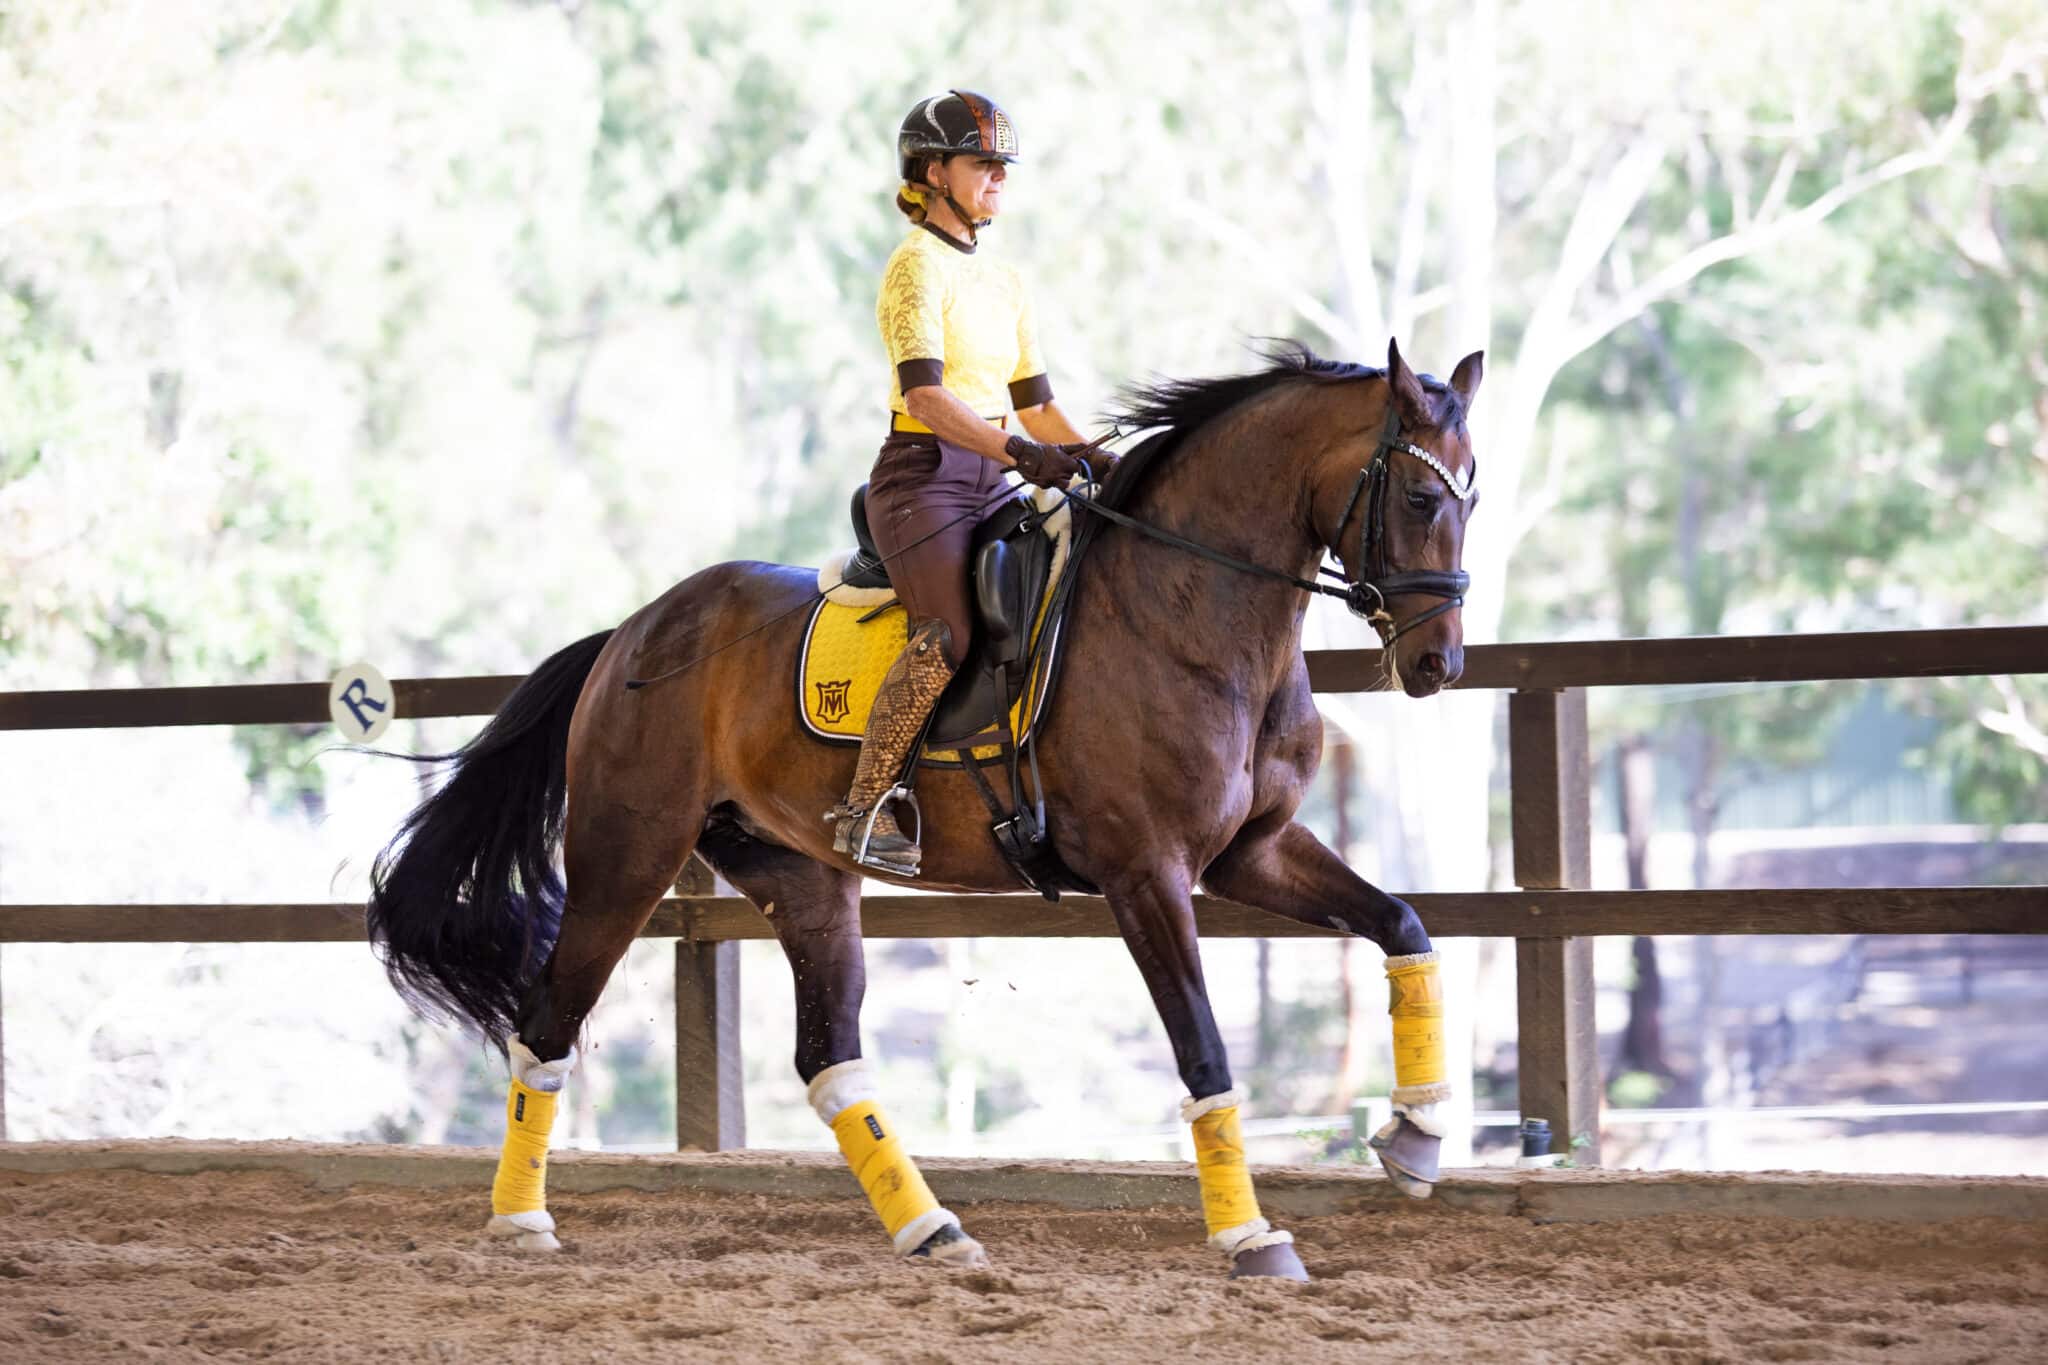 5-y-o Everdeen improving her canter with counter canter.